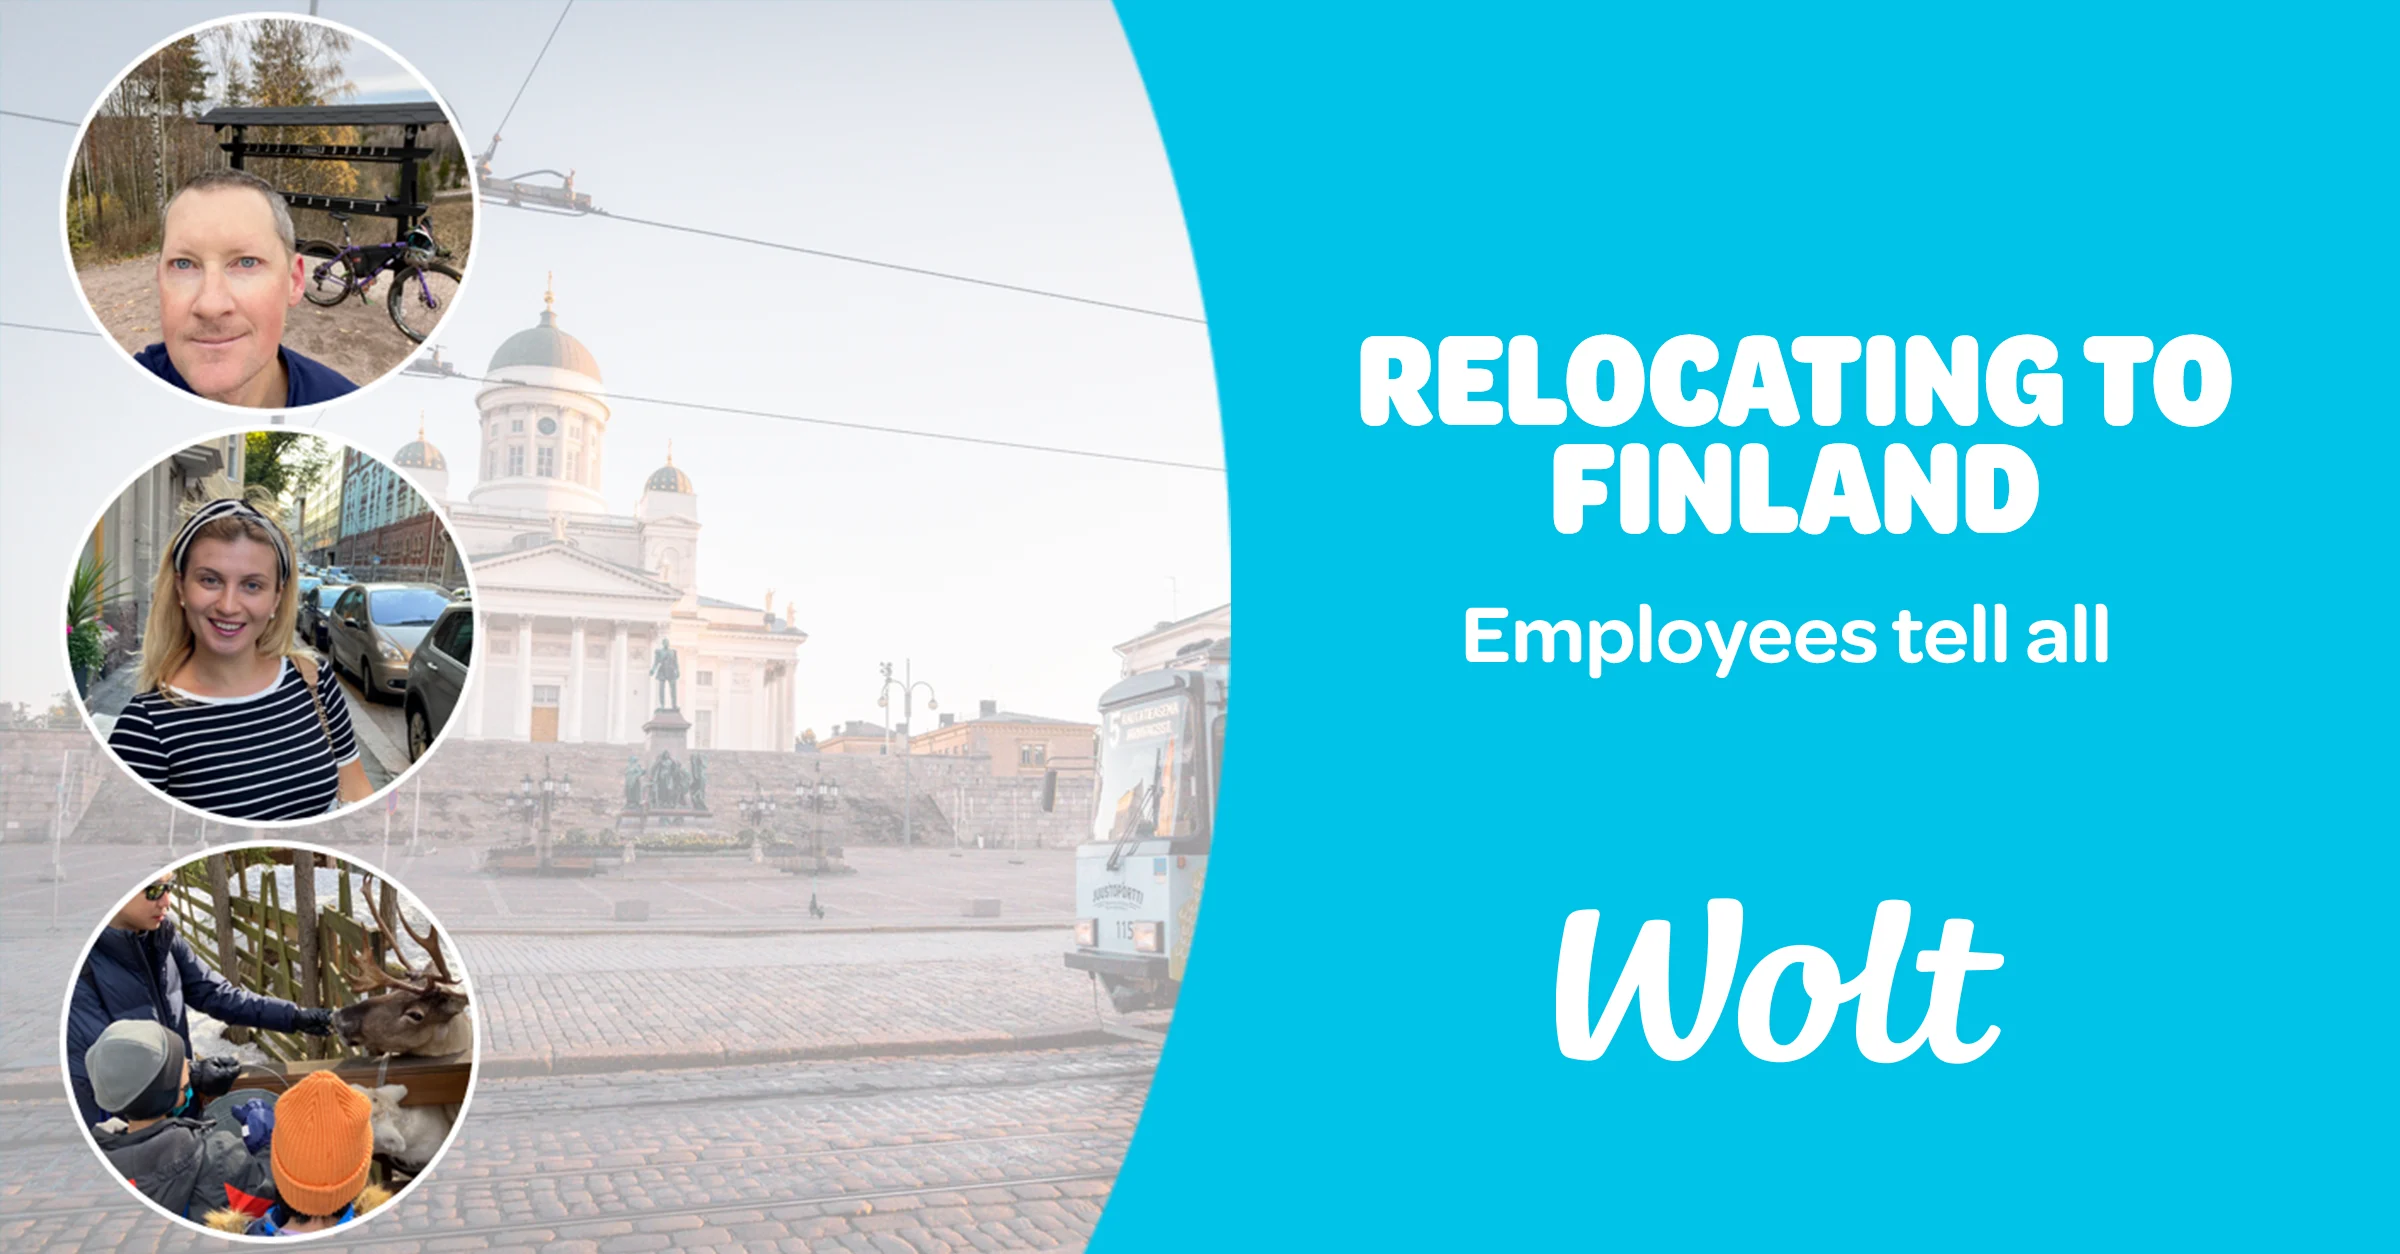 Relocation to Finland - Employees tell all